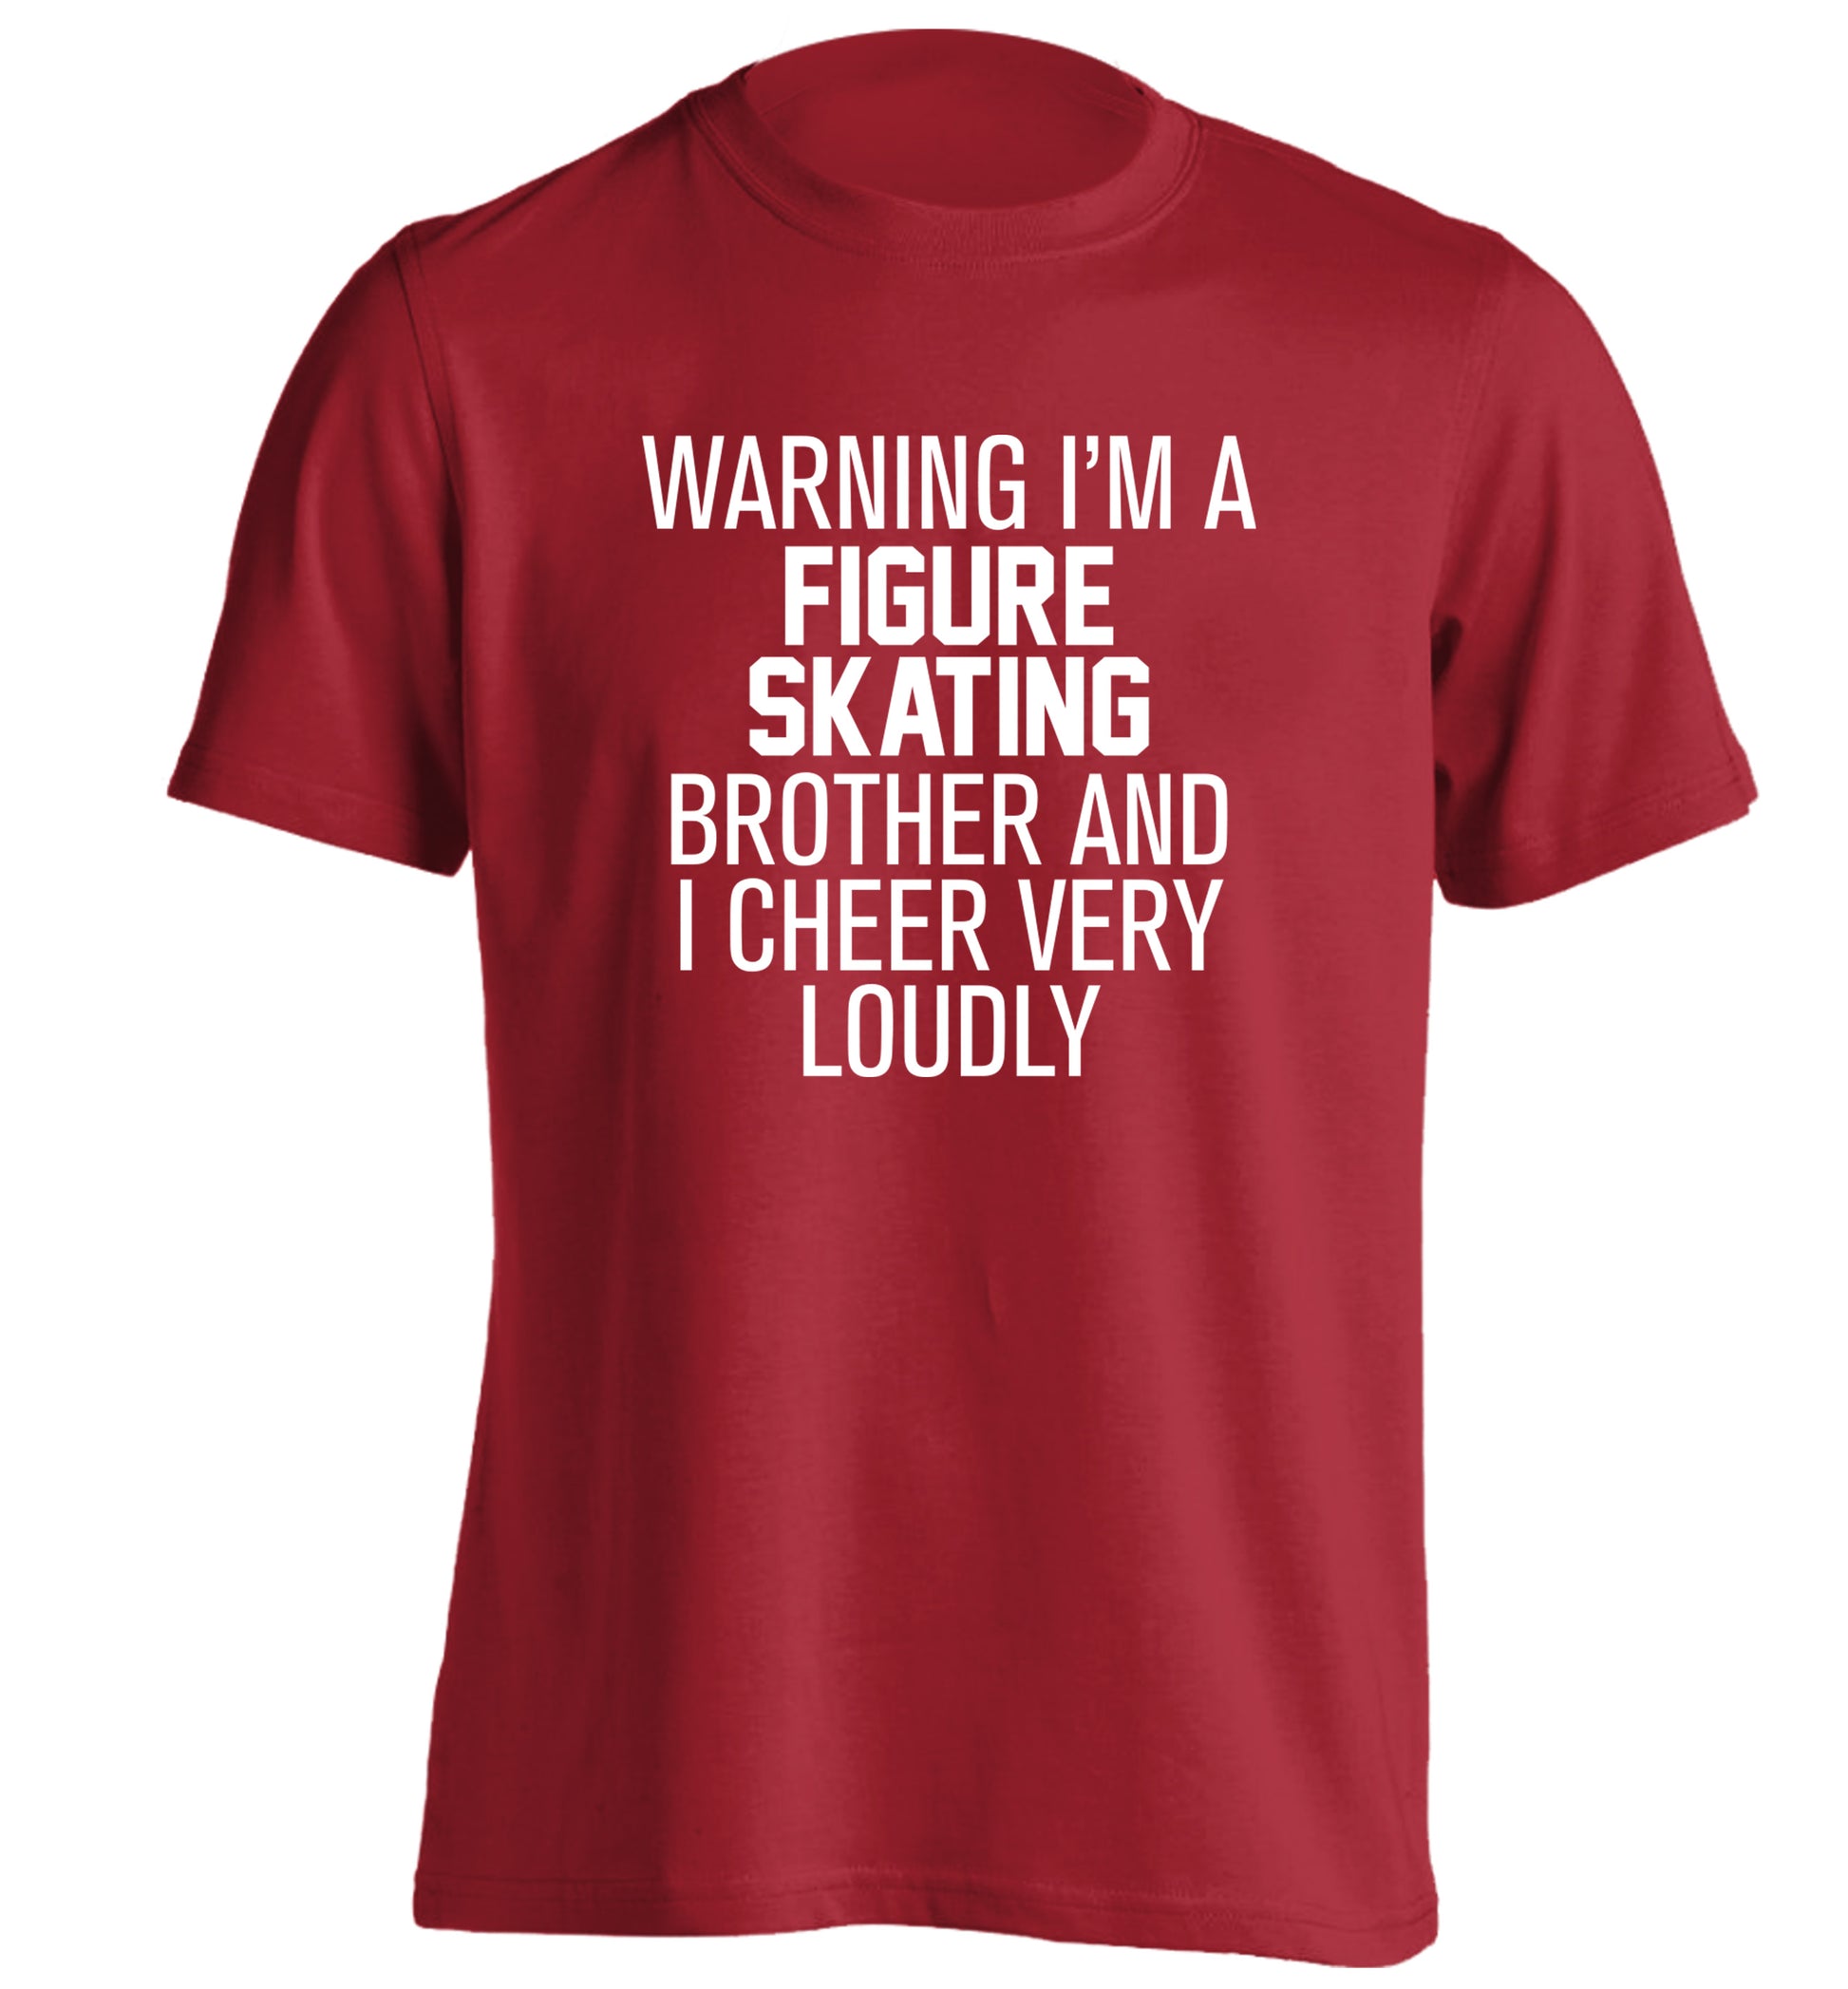 Warning I'm a figure skating brother and I cheer very loudly adults unisexred Tshirt 2XL